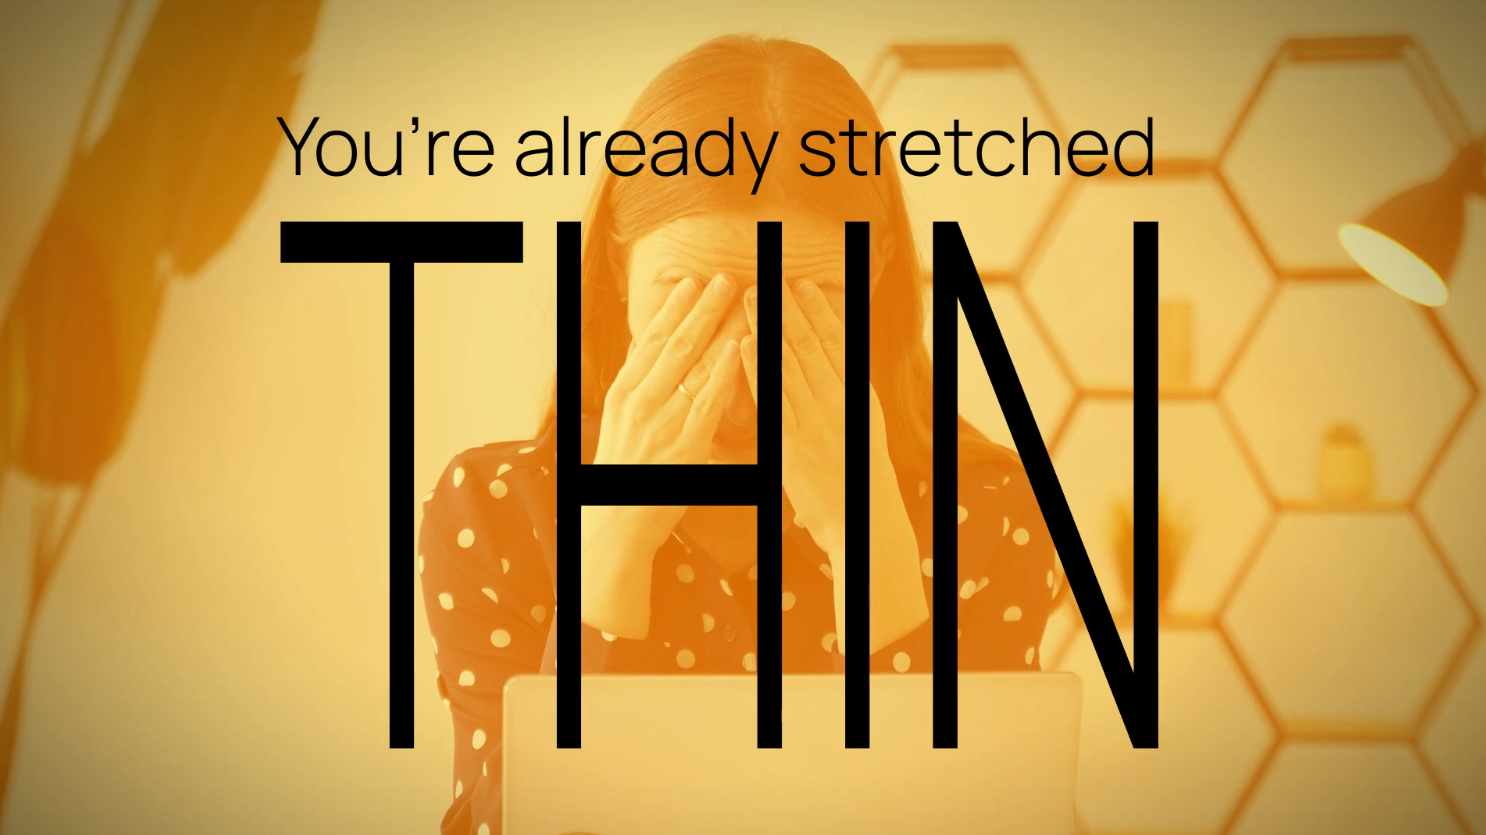 youre already stretched thin